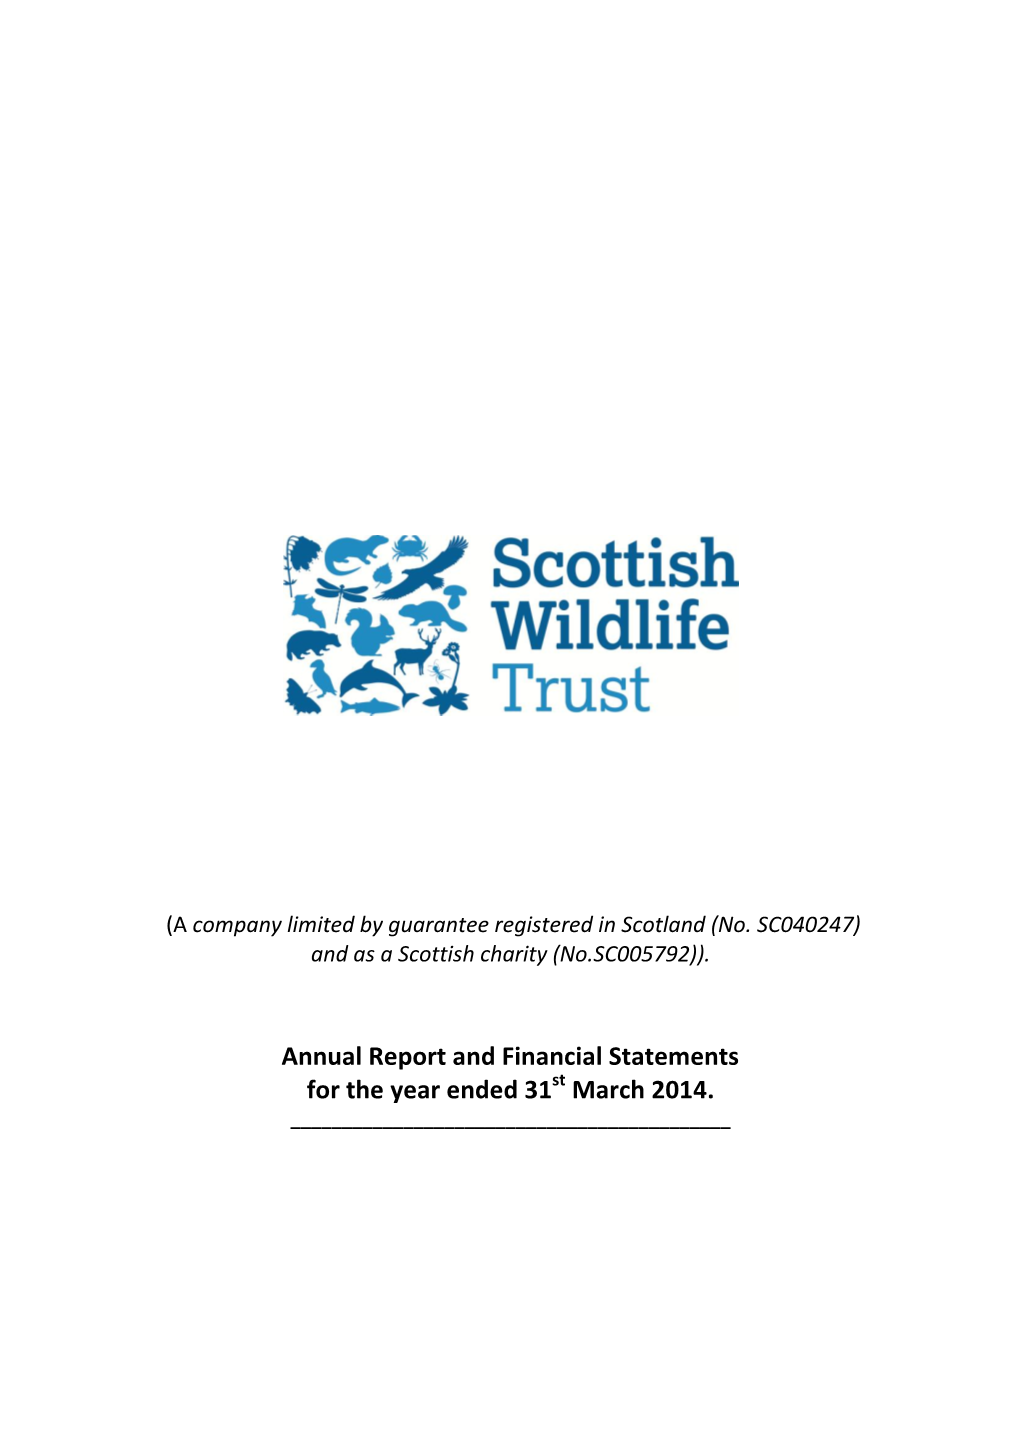 Annual Report and Financial Statements for the Year Ended 31St March 2014